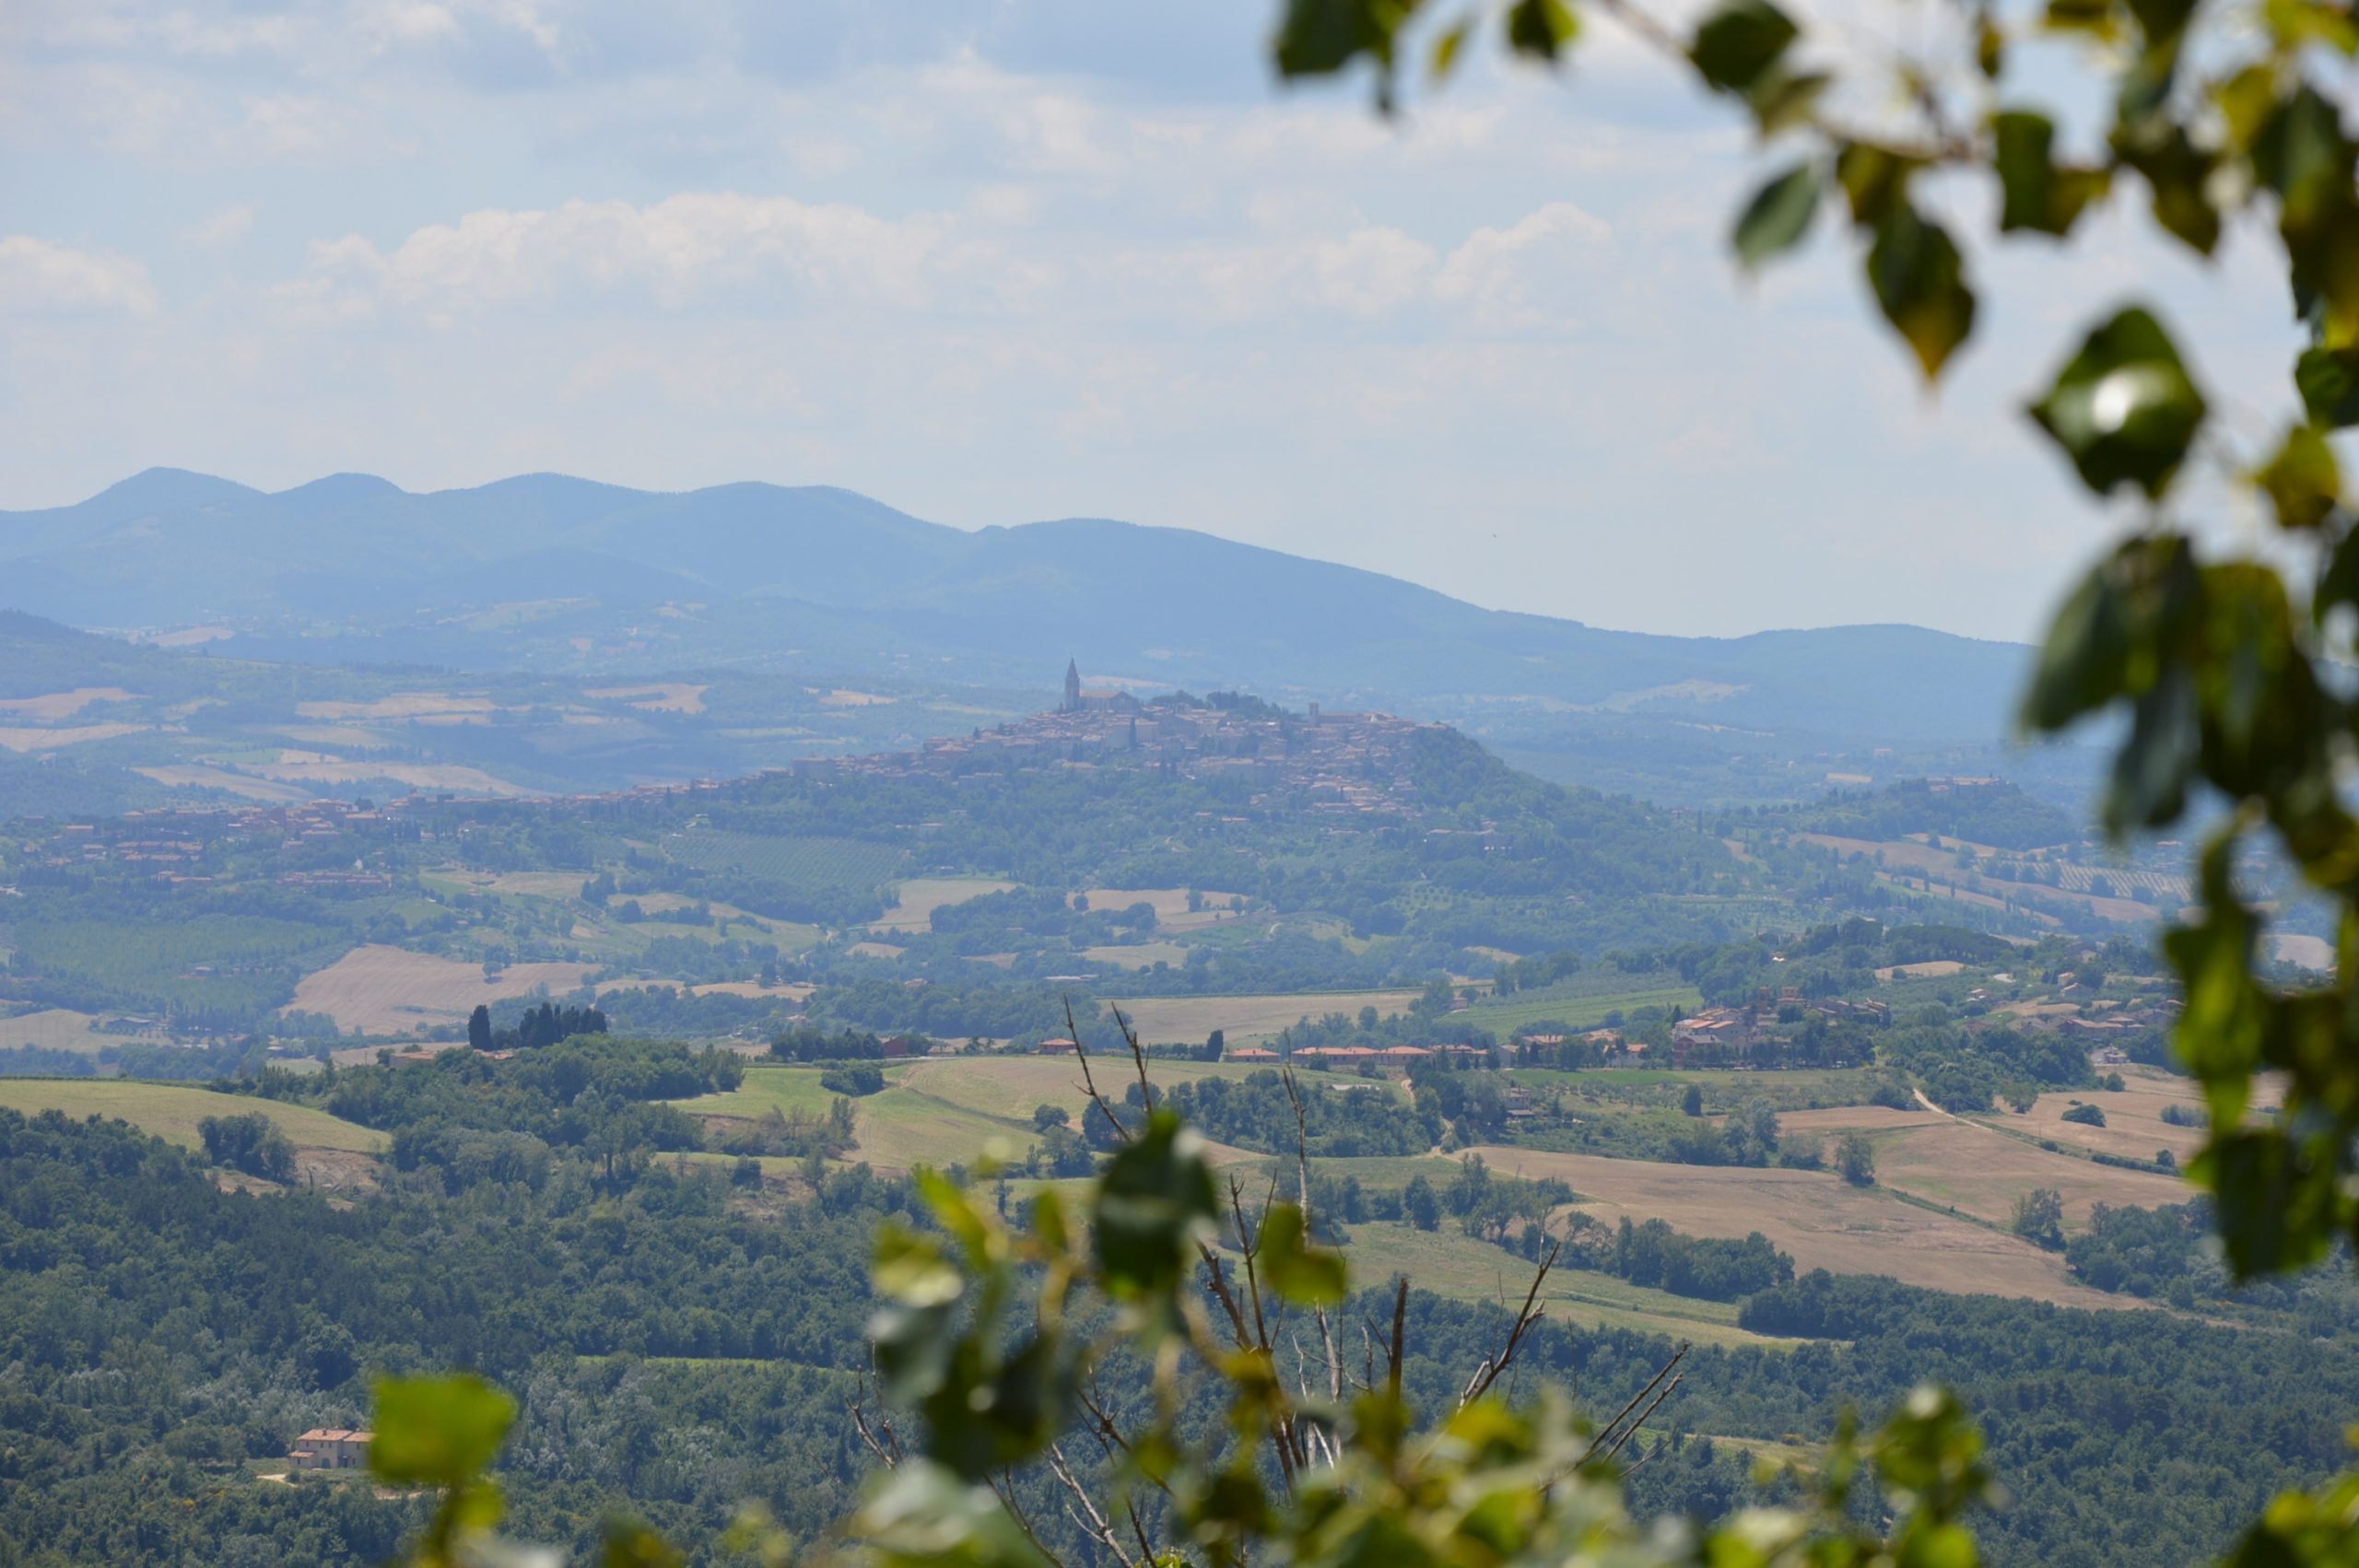 Todi on the hill in the distance